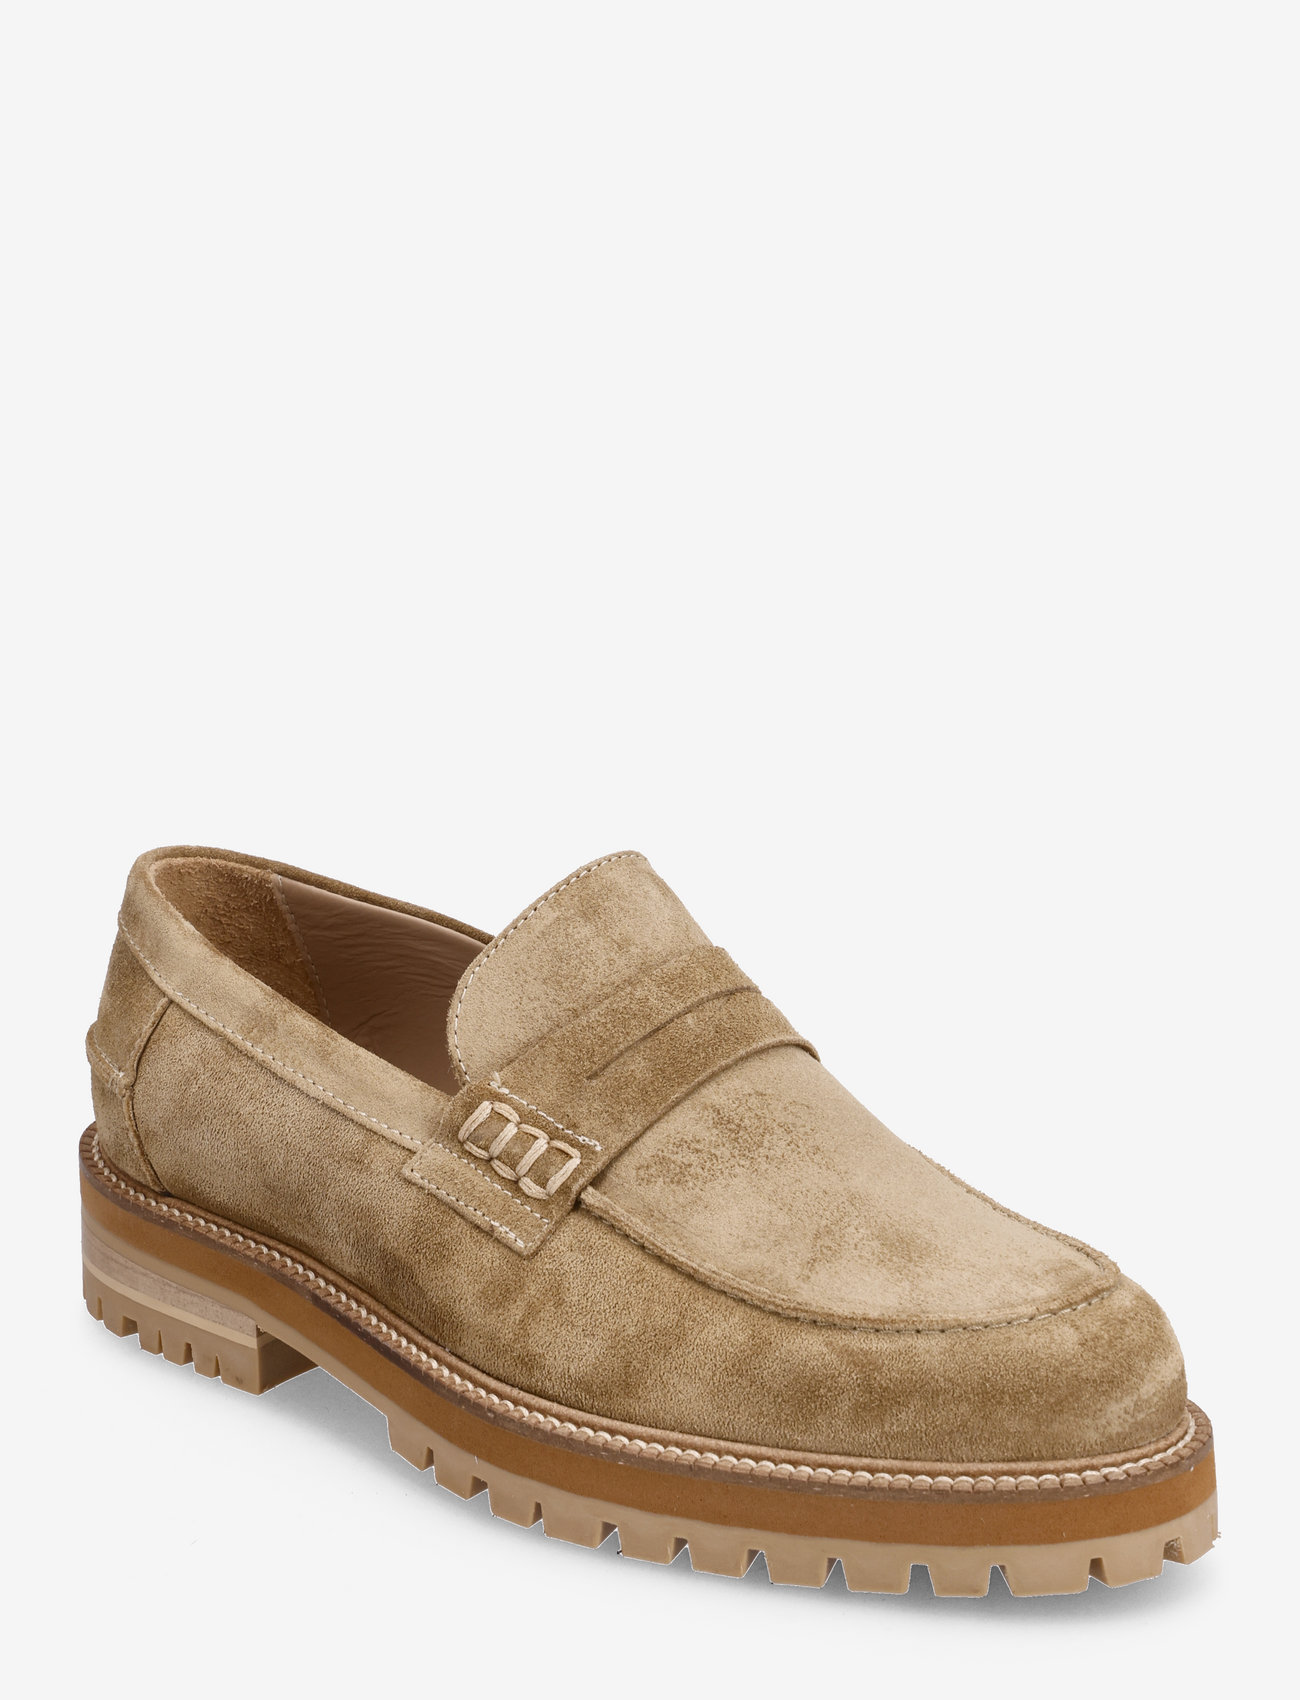 ANGULUS - Loafer - birthday gifts - 2217 sand - 0